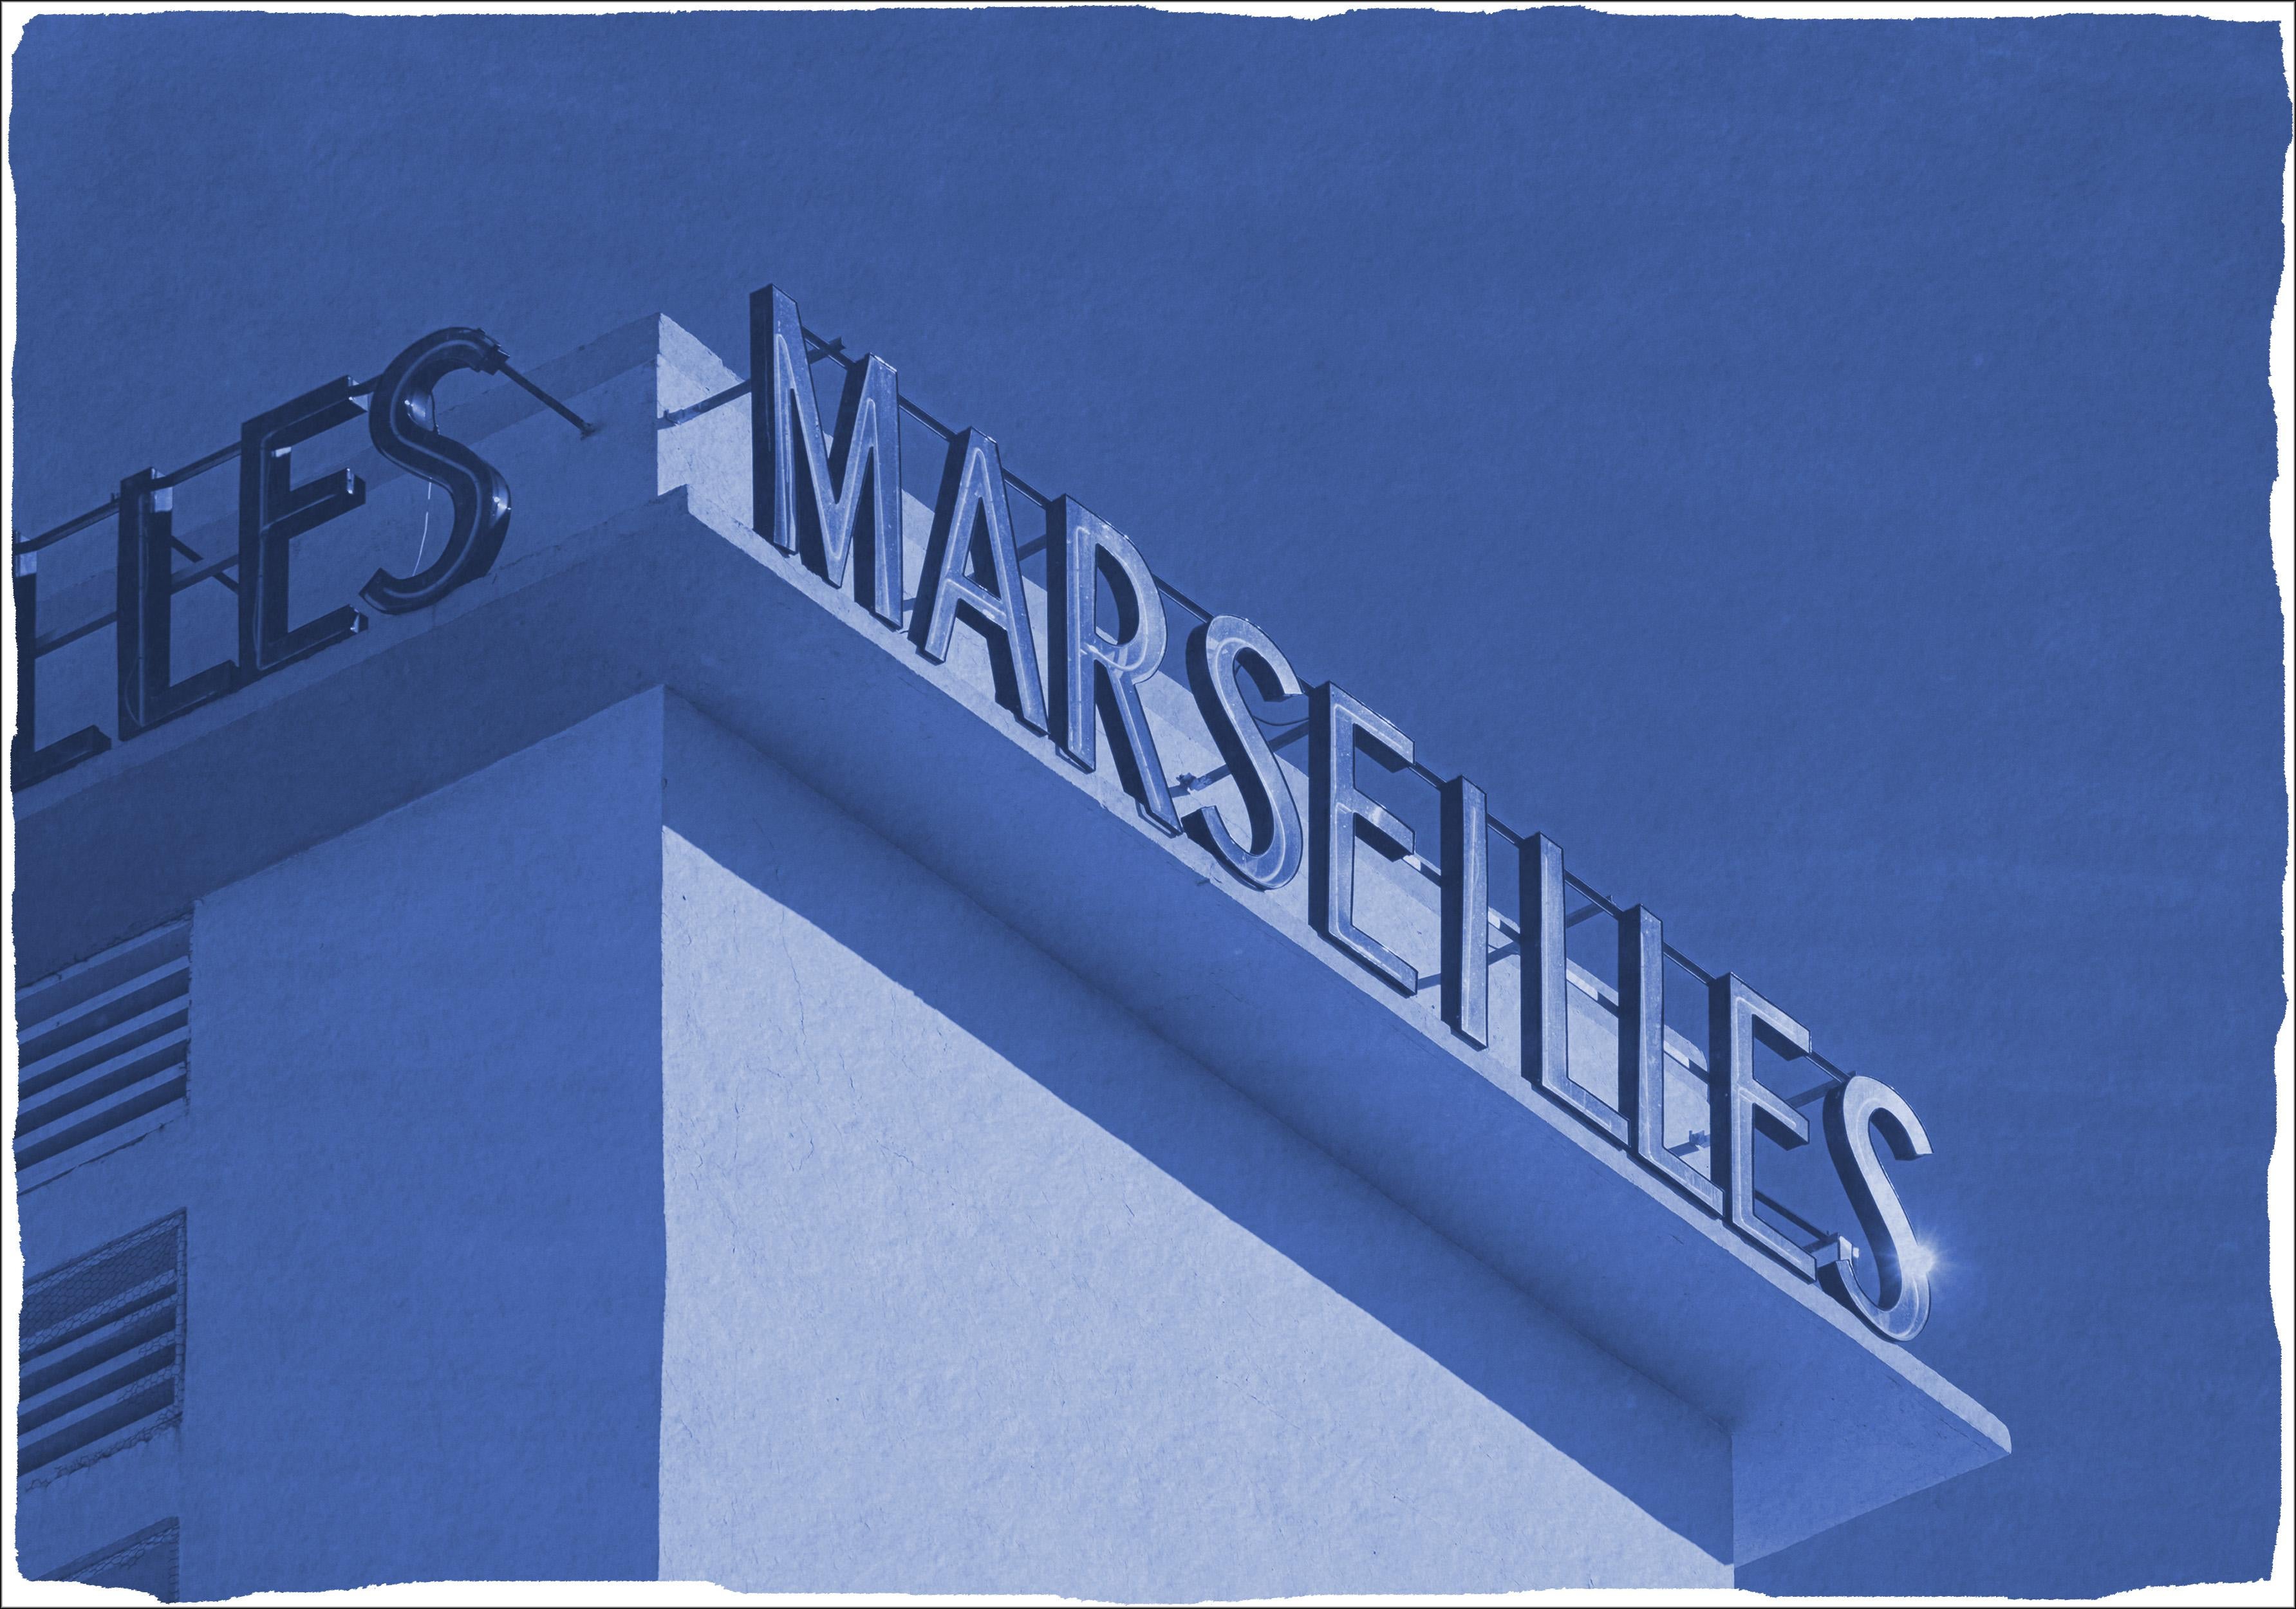 Lettering of Miami Buildings Typography, Les Marseilles, Handmade Blueprint 2021